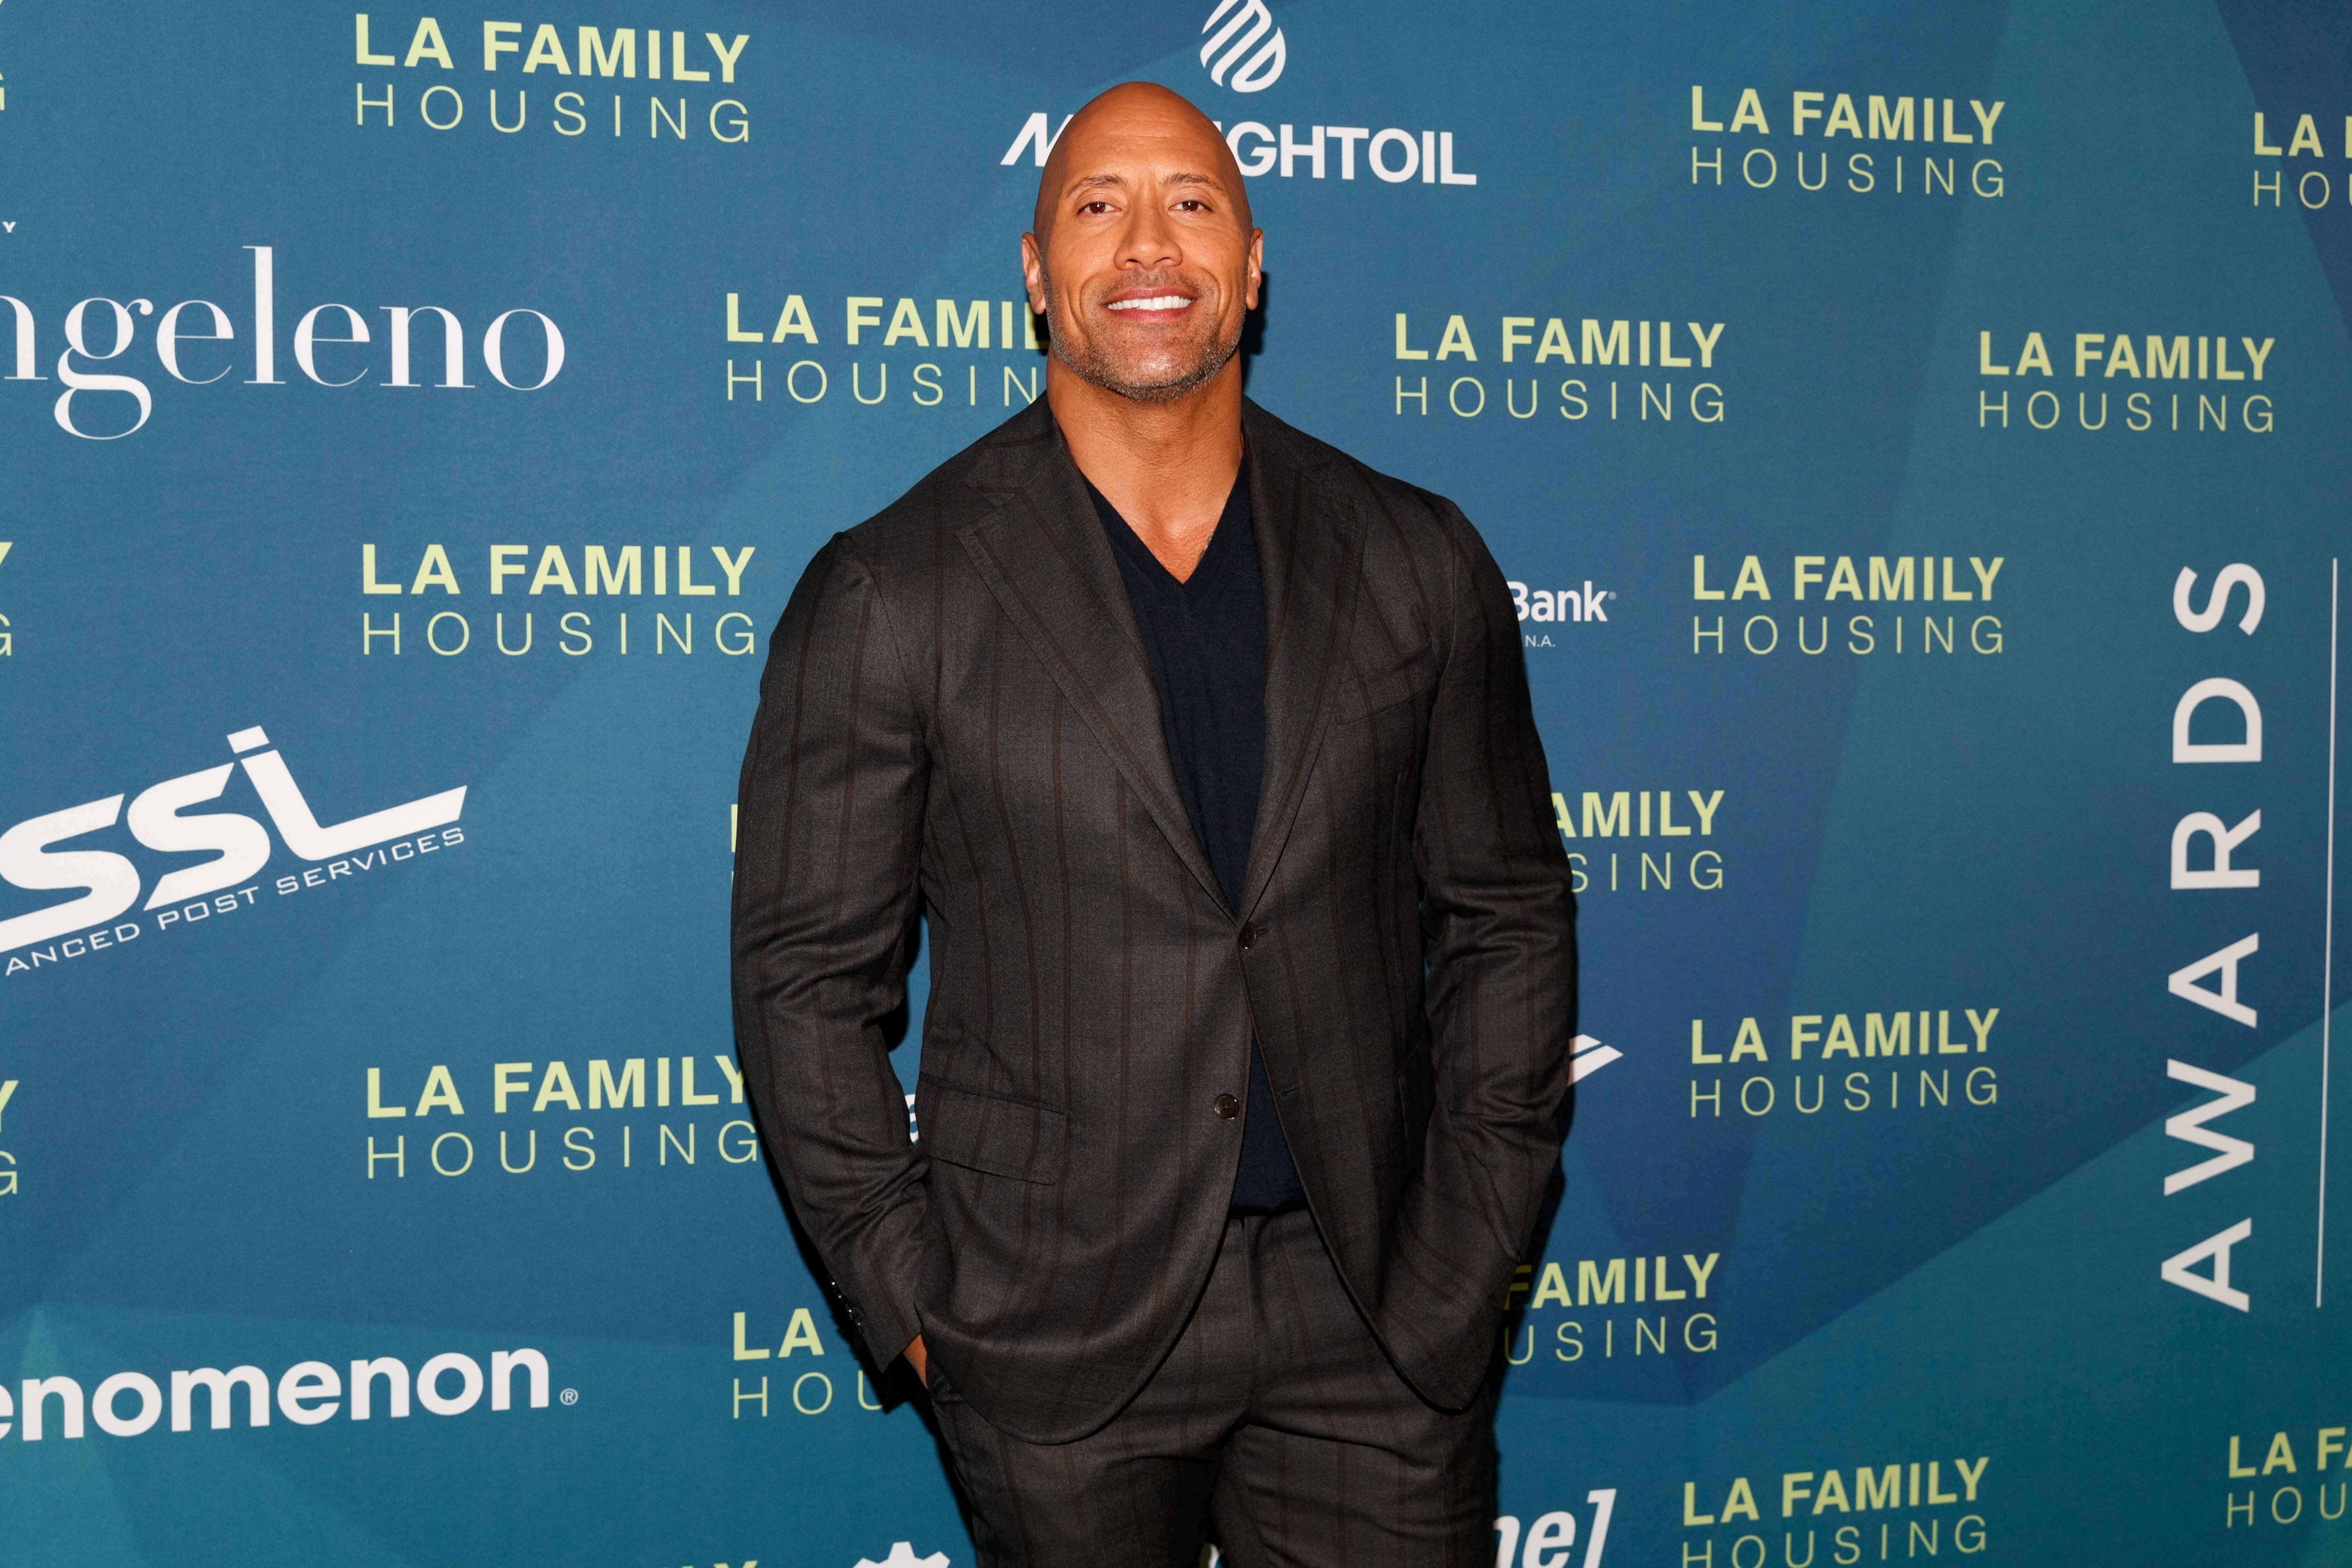 Dwayne Johnson at the LAFH Awards at The Lot in West Hollywood on April 5, 2018 in West Hollywood, California | Photo: Getty Images